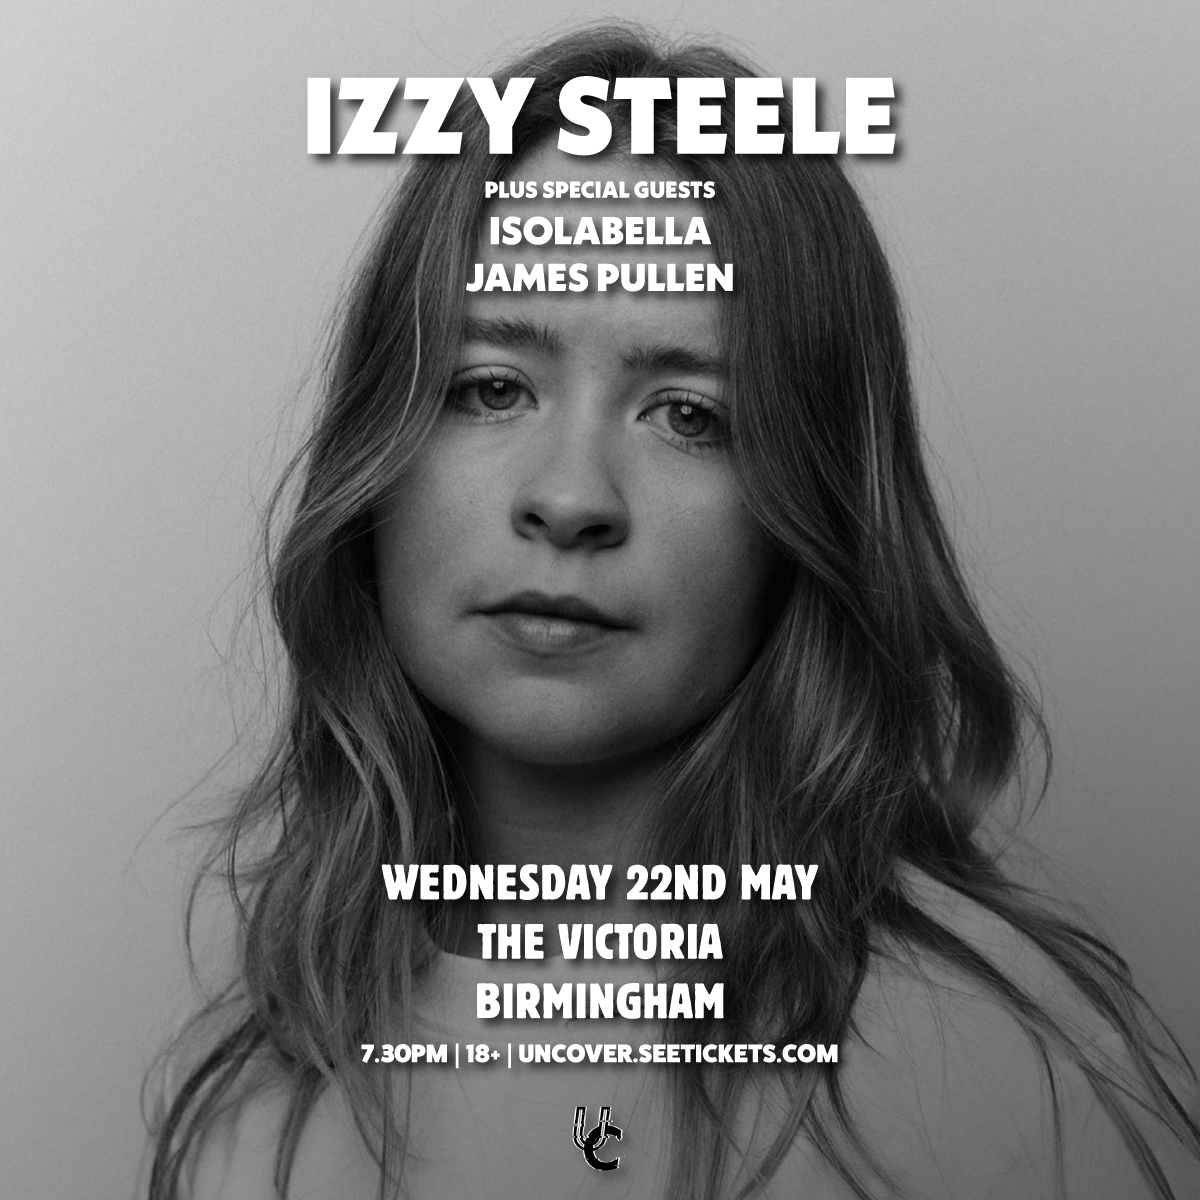 NEW SHOW 💙 Singer-songwriter Izzy Steele is set to headline @TheVictoria, Birmingham, on Wednesday, 22nd May, with special guests Isolabella and James Pullen ✨ Tickets on sale now: bit.ly/3WuHTWP